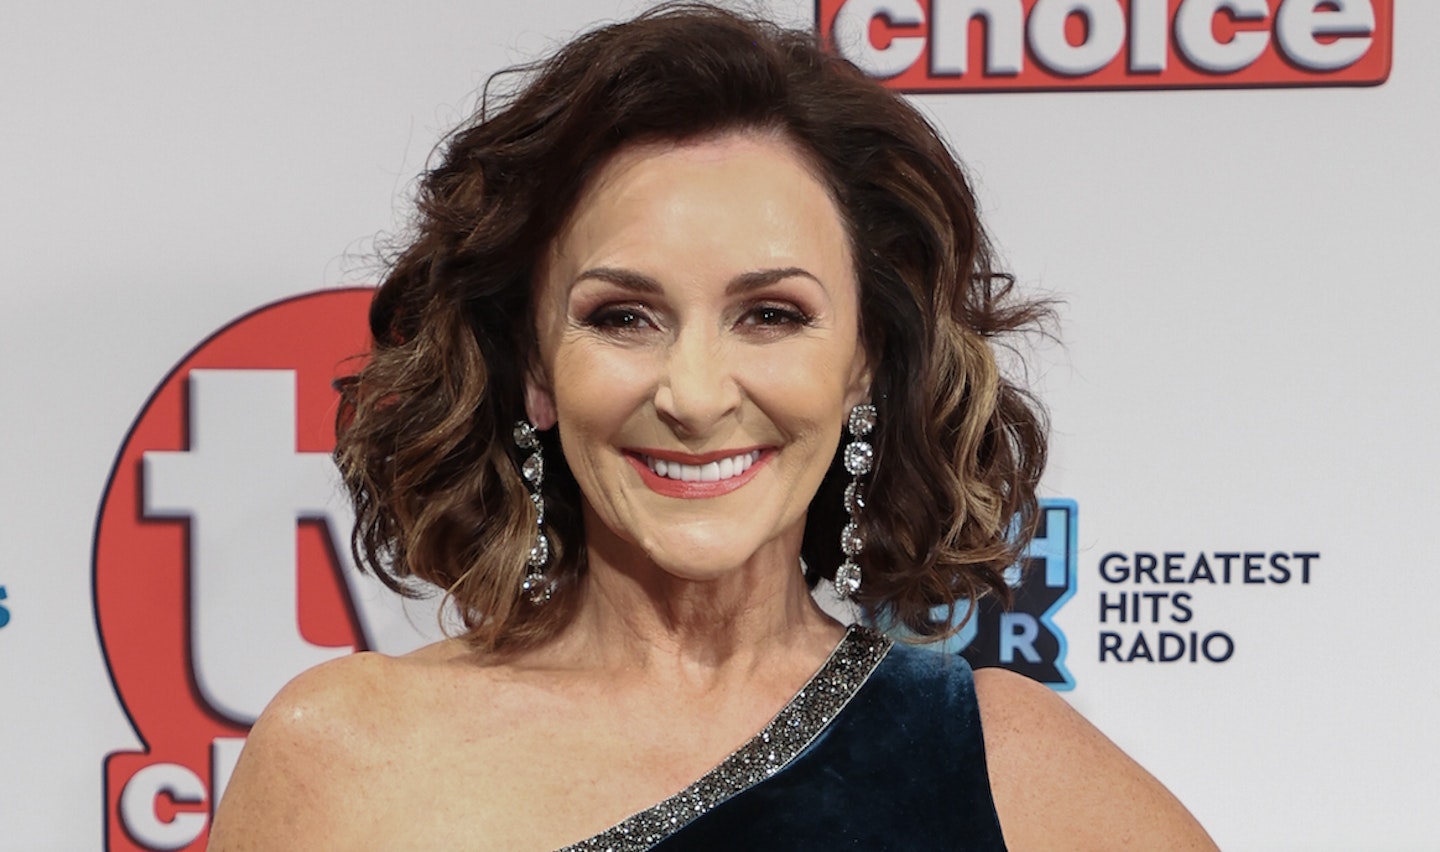 Shirley Ballas on the red carpet